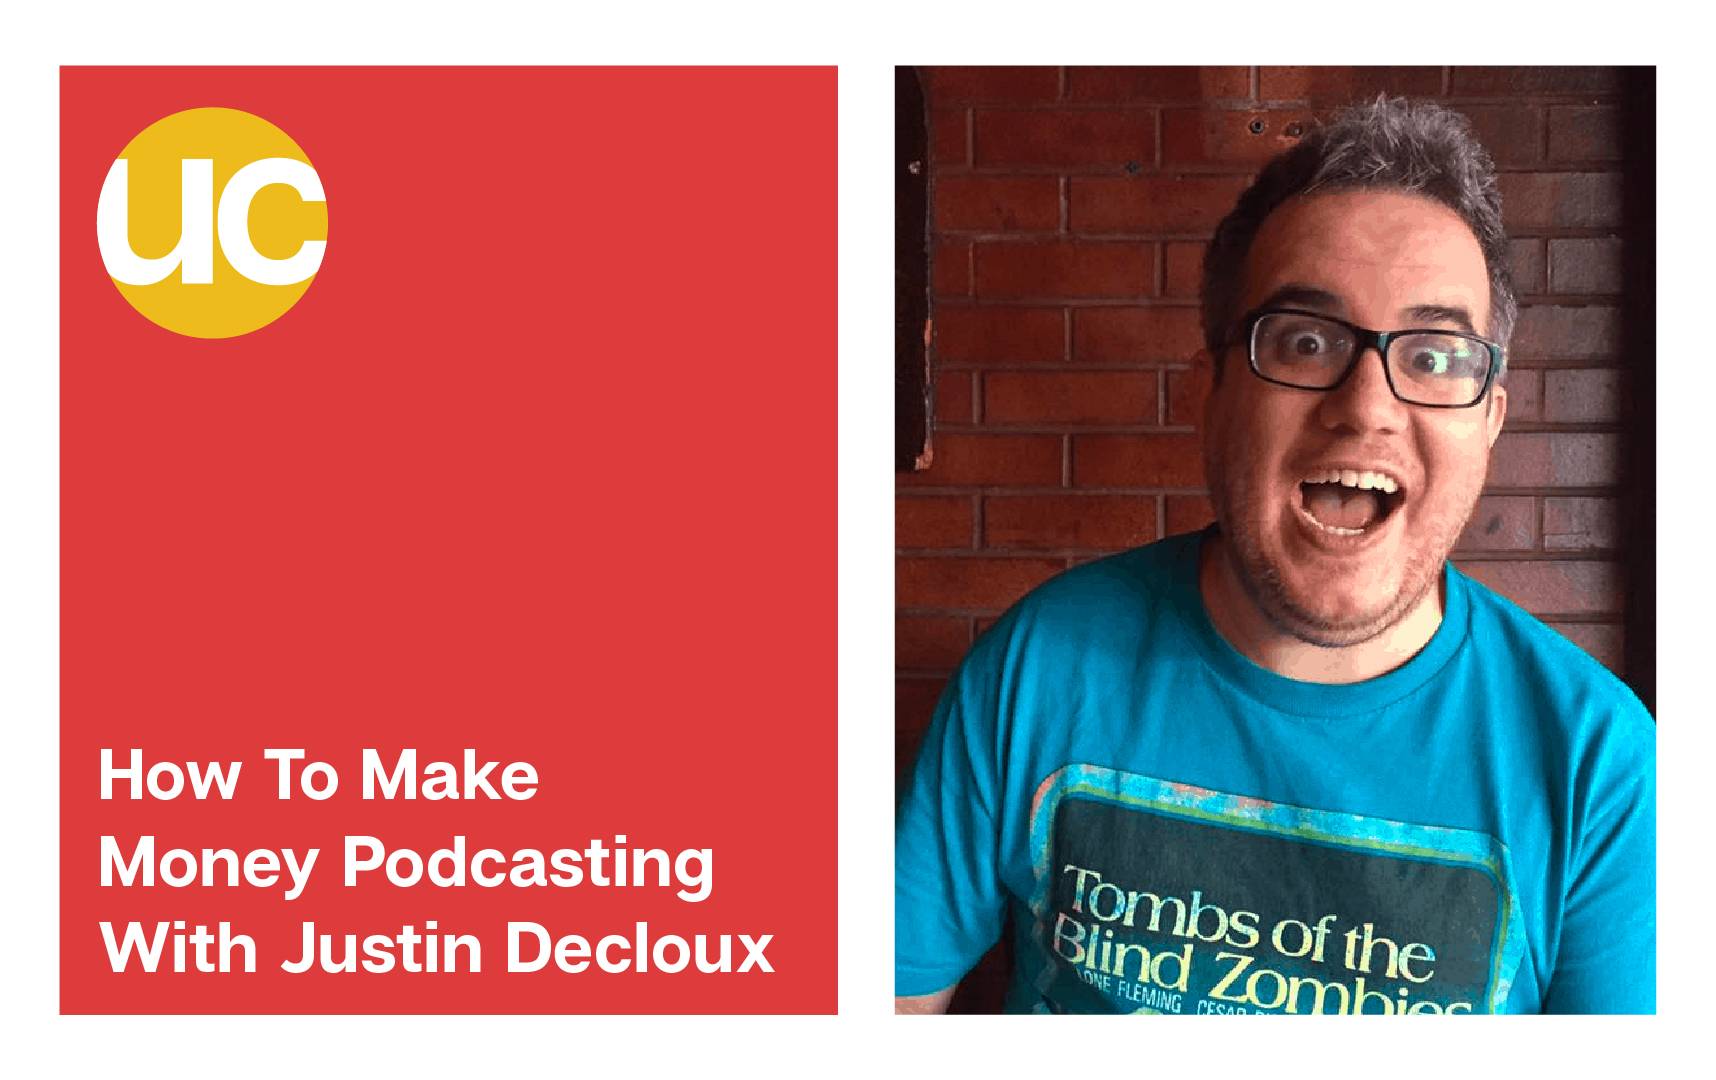 How To Make Money Podcasting with Justin Decloux